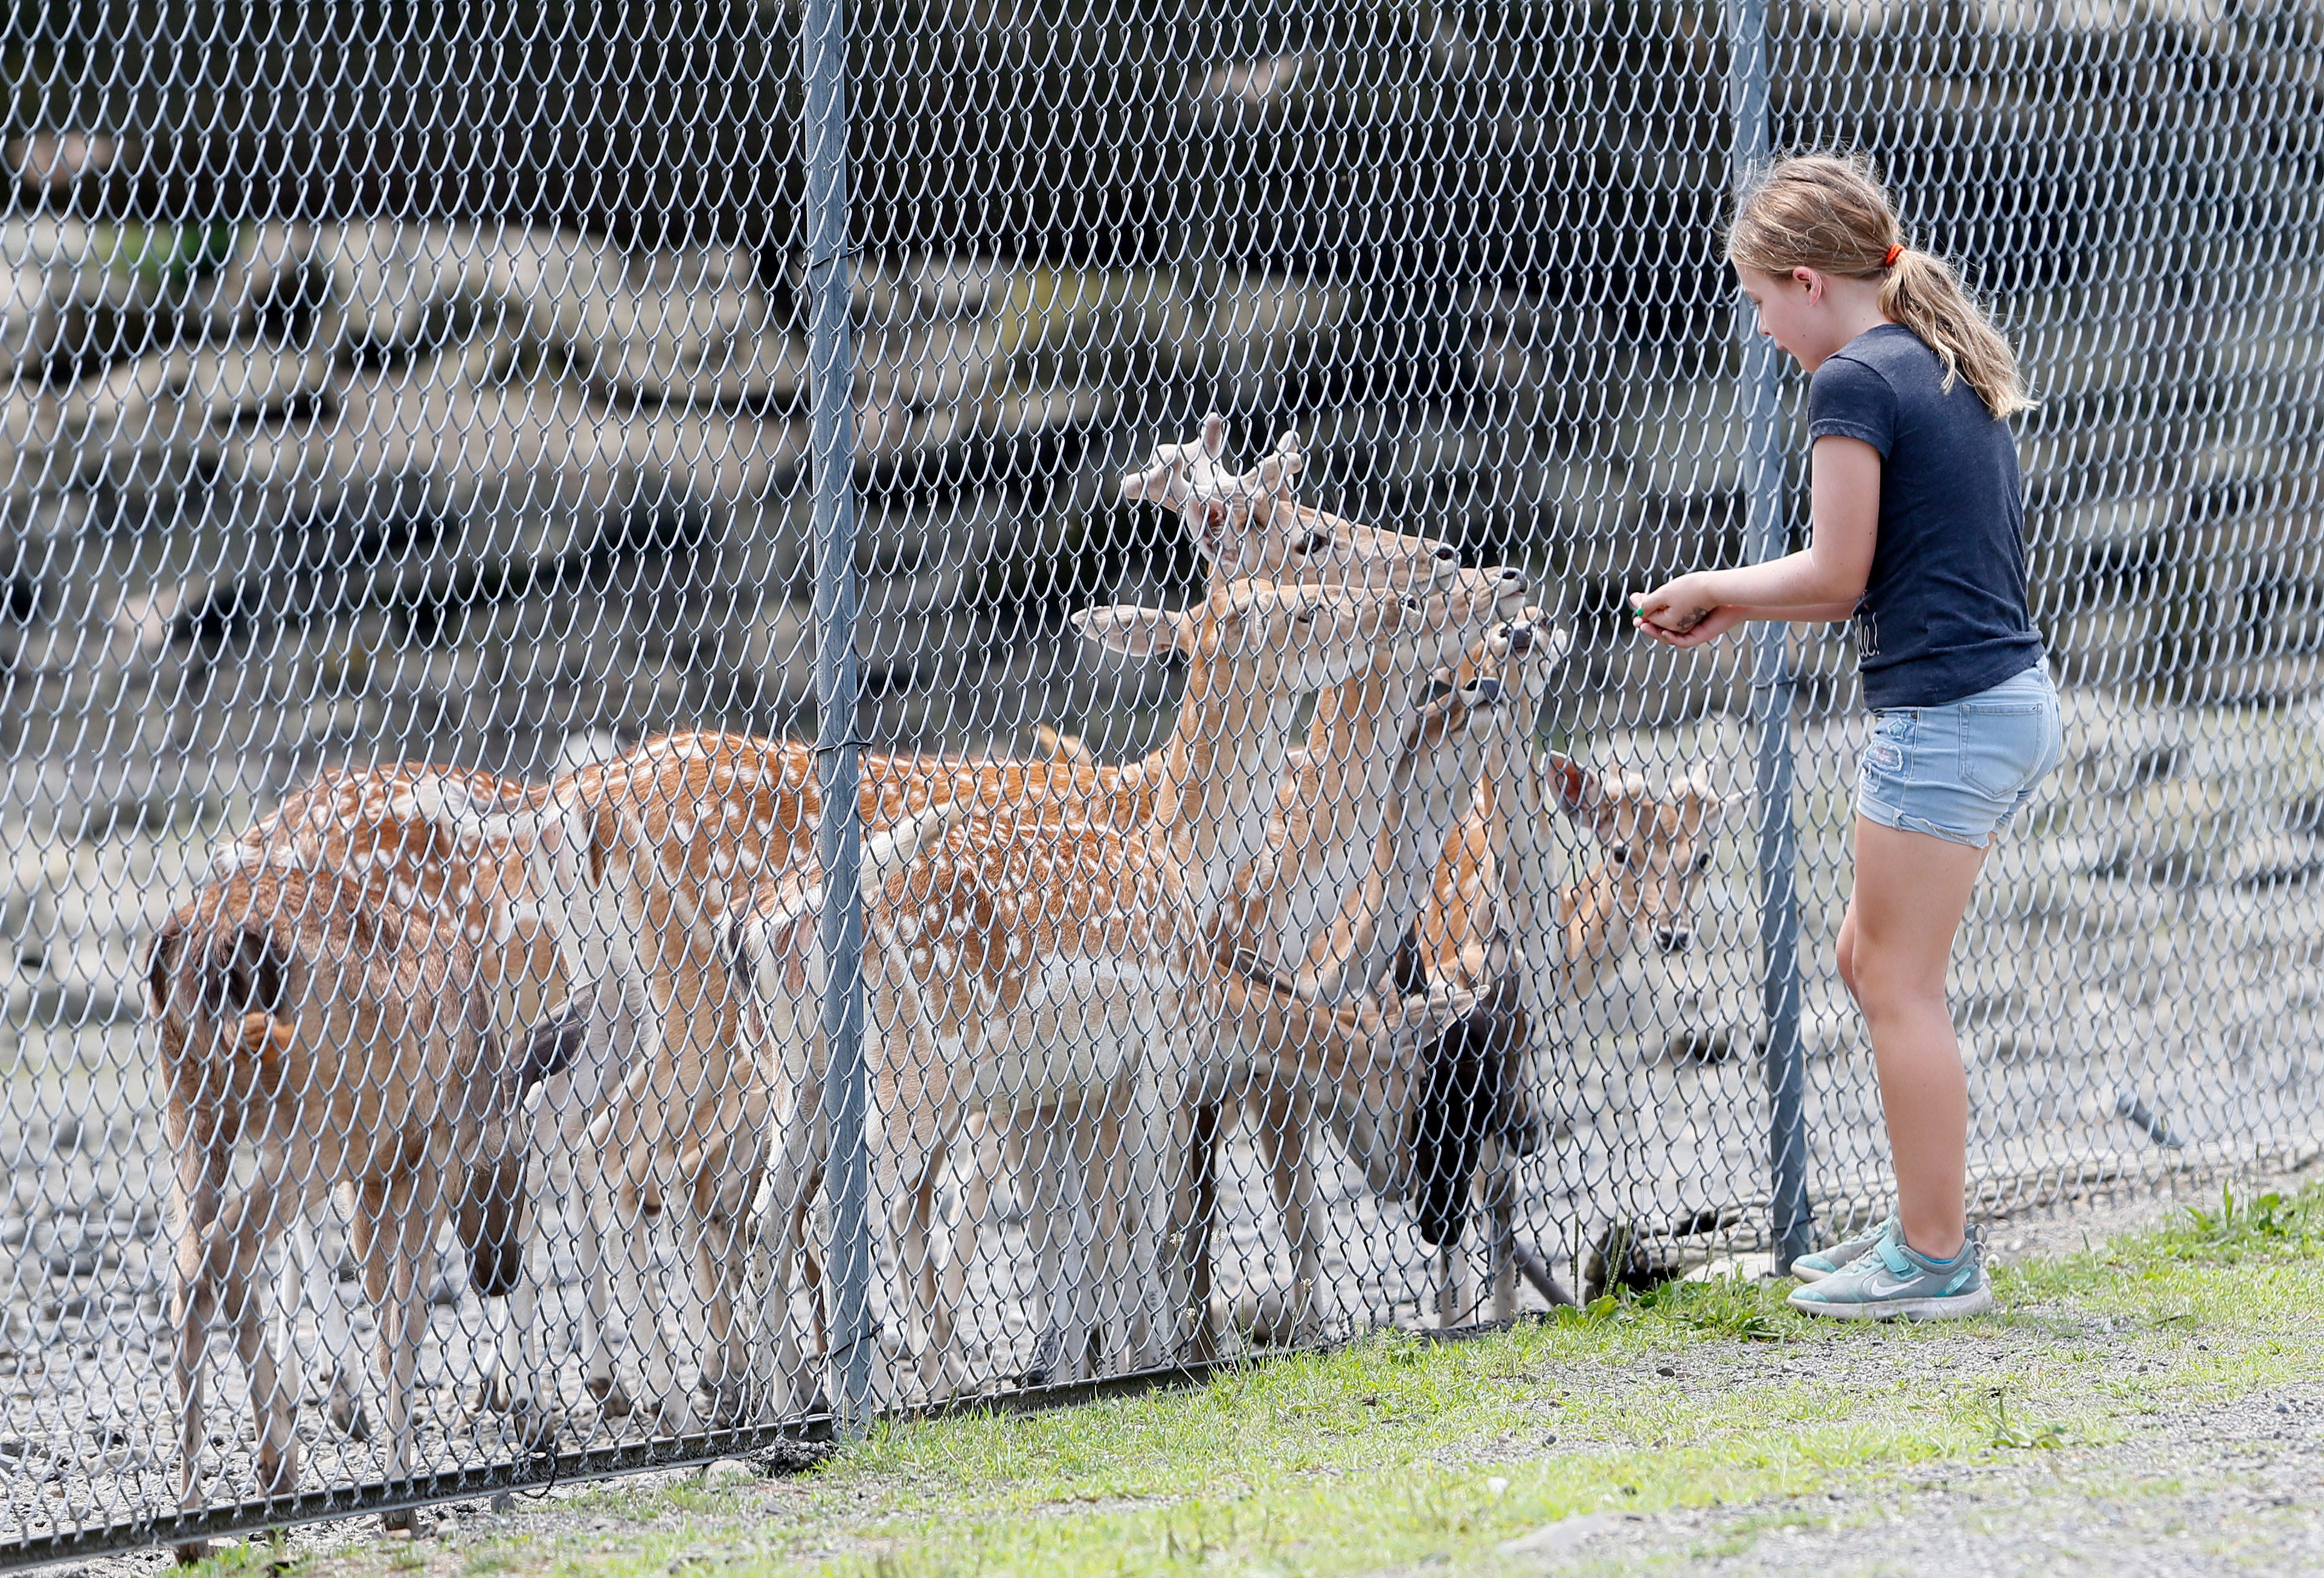 Arielle Acheson, 9, feeds deer during Junior Zookeeper Day at Space Farms Zoo and Museum Saturday, July 20, 2019.